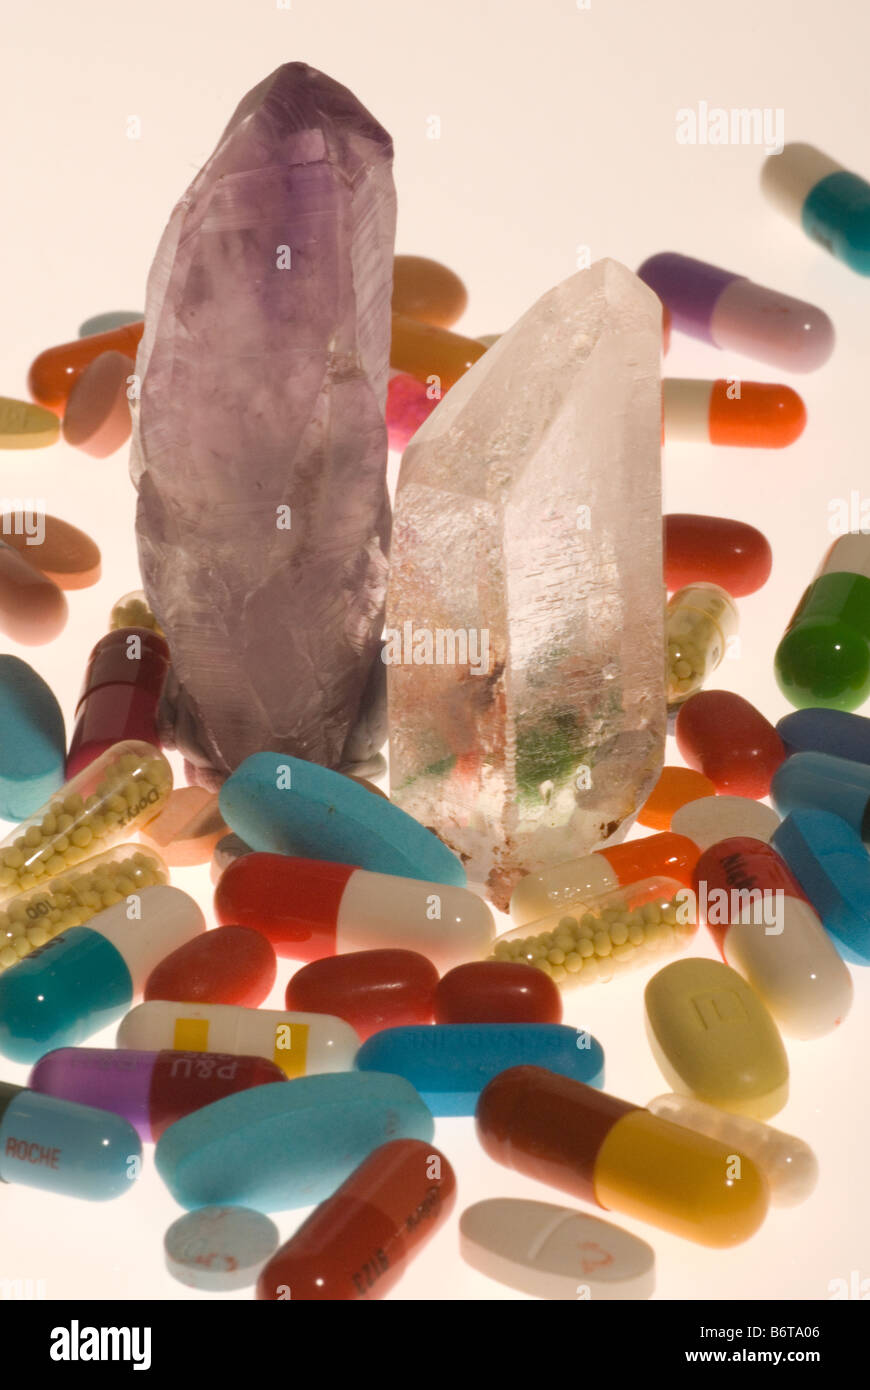 Drugs and crystals Stock Photo